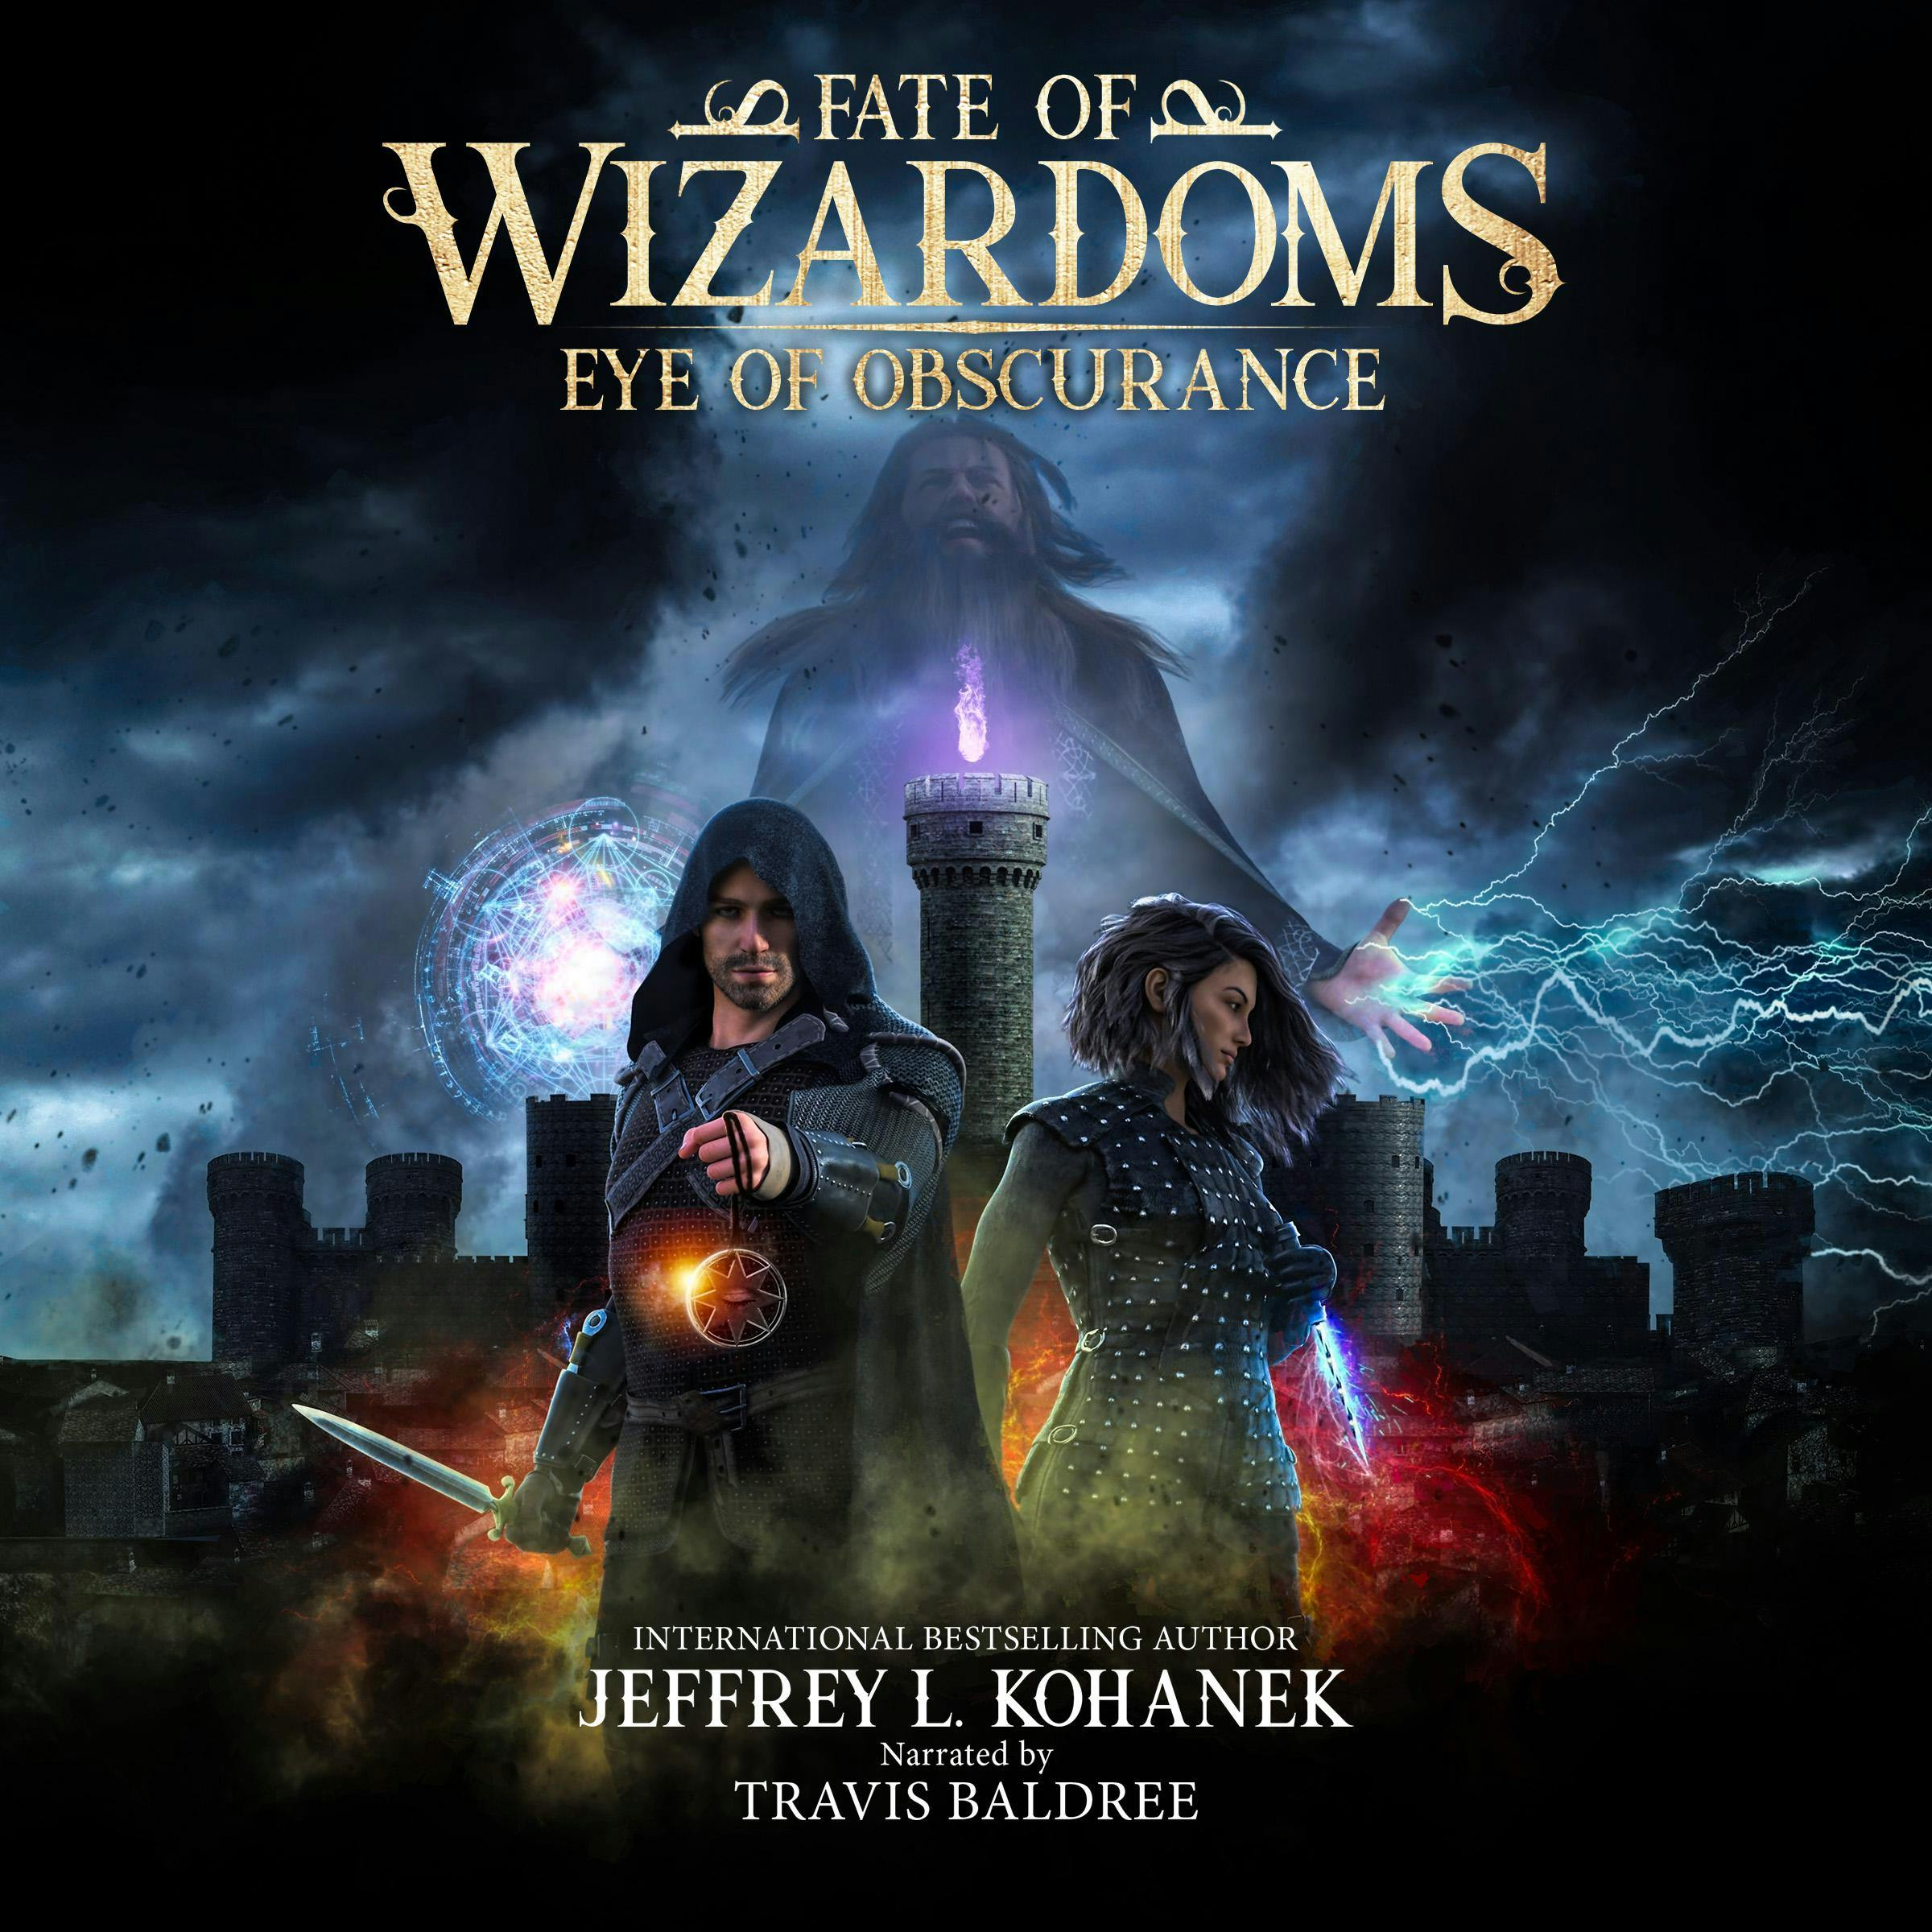 Wizardoms: Eye of Obscurance - undefined